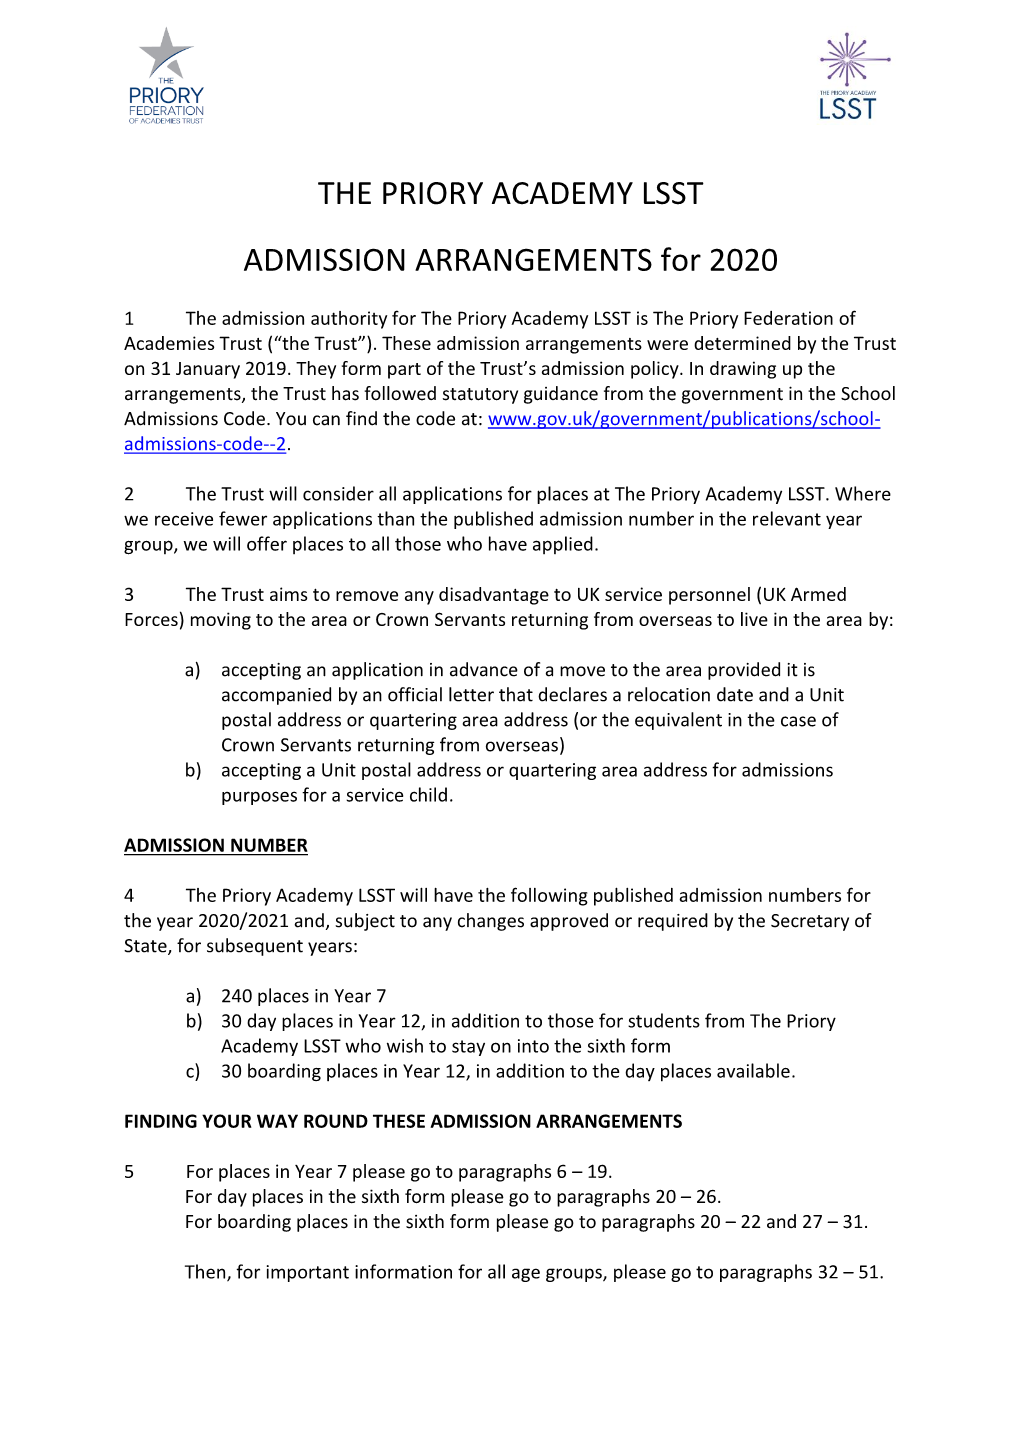 THE PRIORY ACADEMY LSST ADMISSION ARRANGEMENTS For